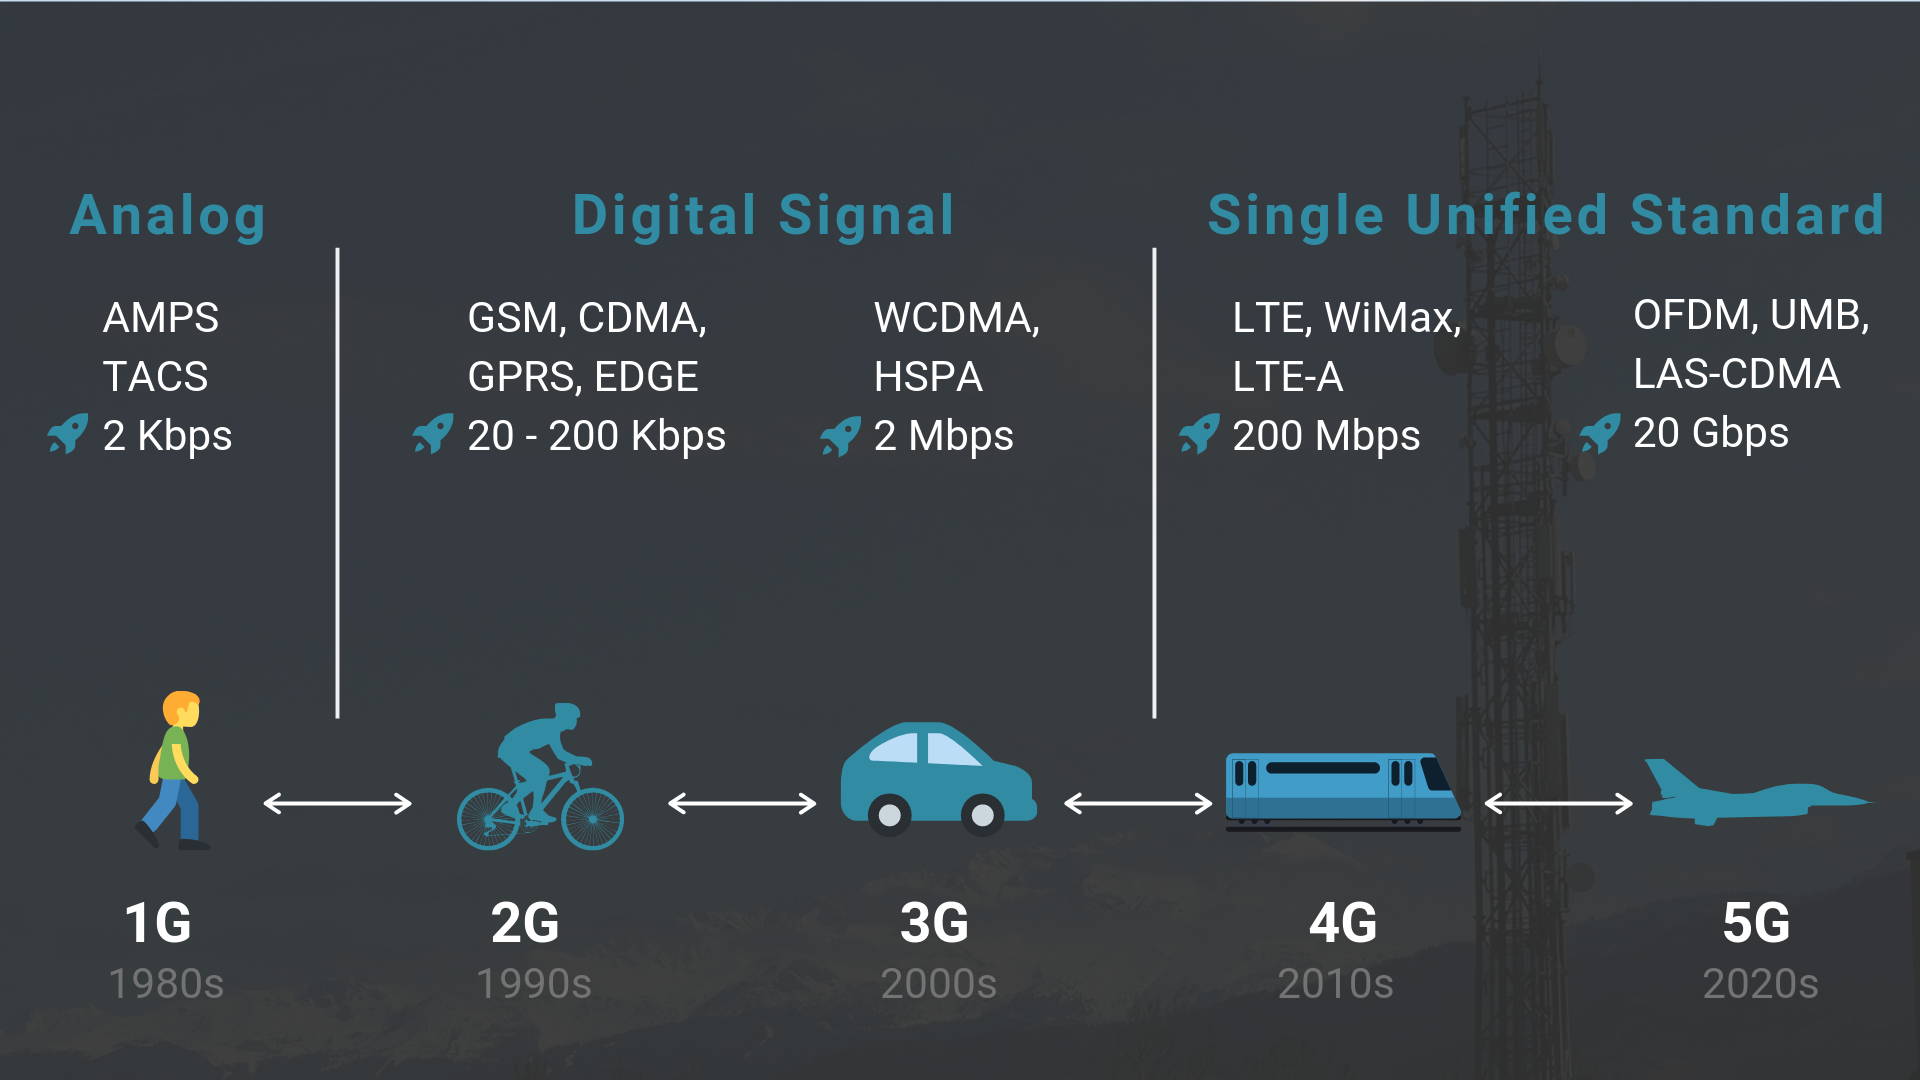 1g to 5g technology